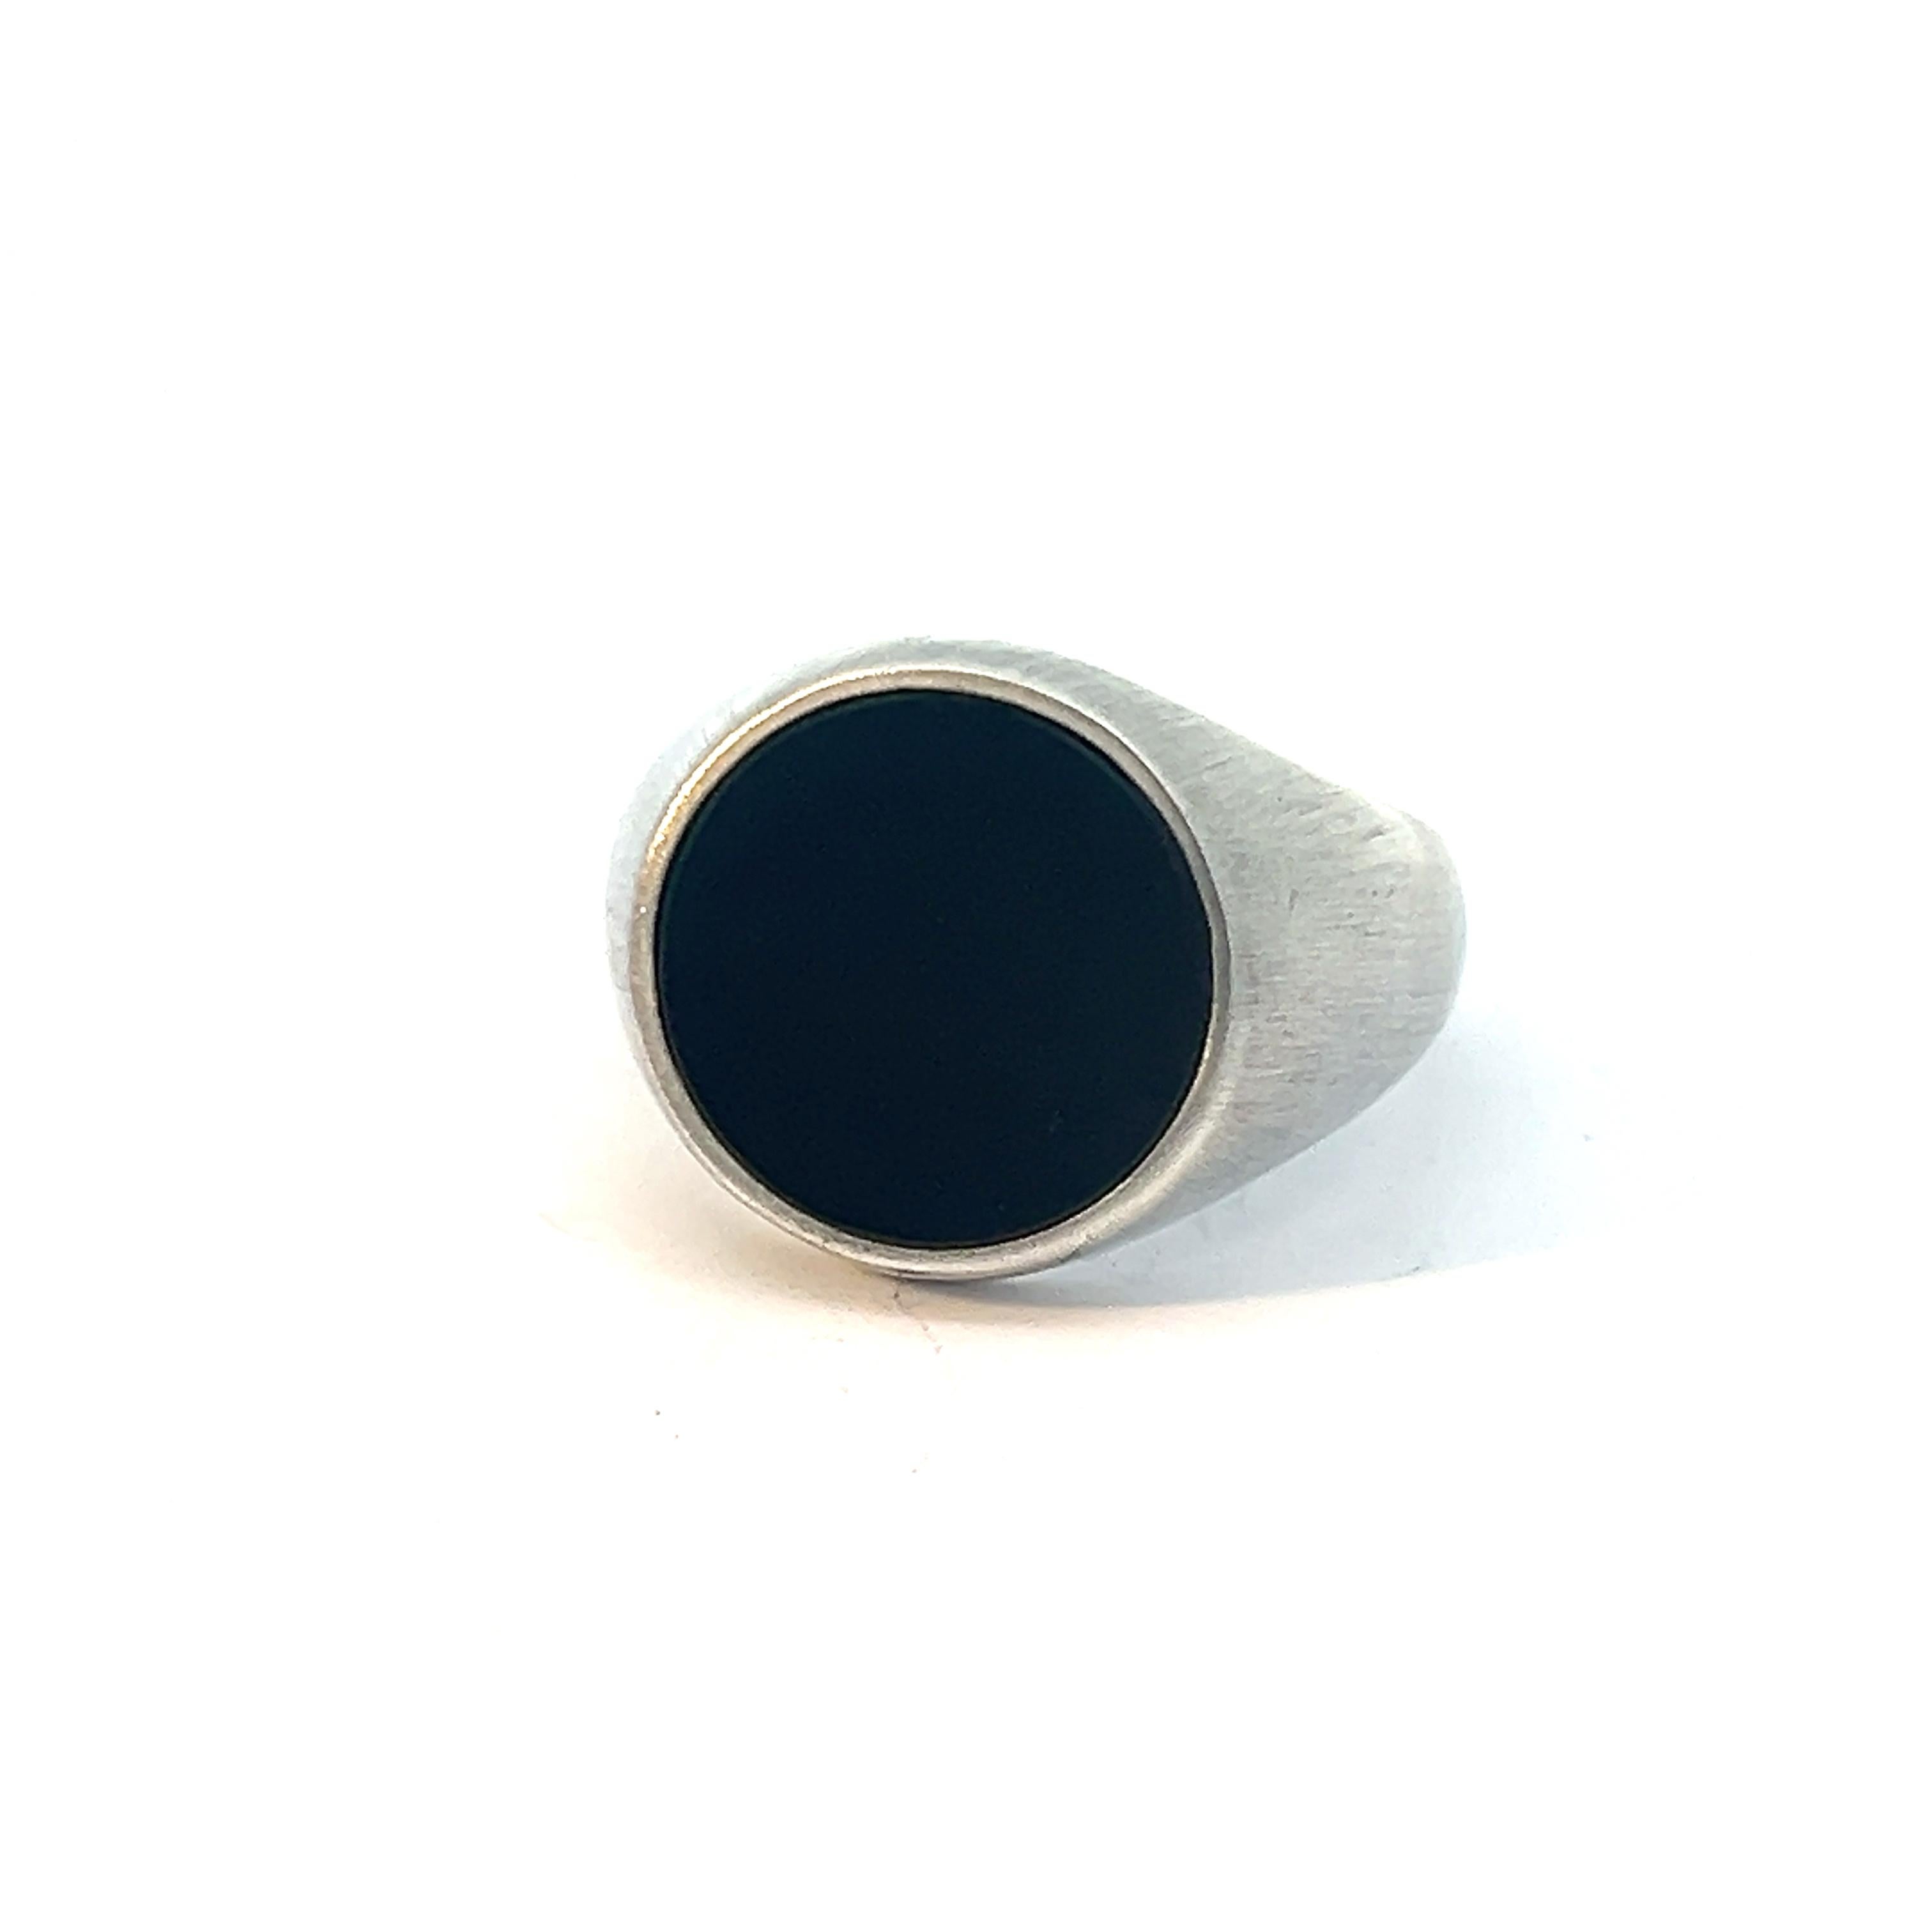 Meticulously crafted from sterling silver, this signet ring embodies understated sophistication and timeless appeal. Its classic design is elevated by a flat, round black onyx gemstone, exuding an air of refined elegance. The deep, lustrous hue of